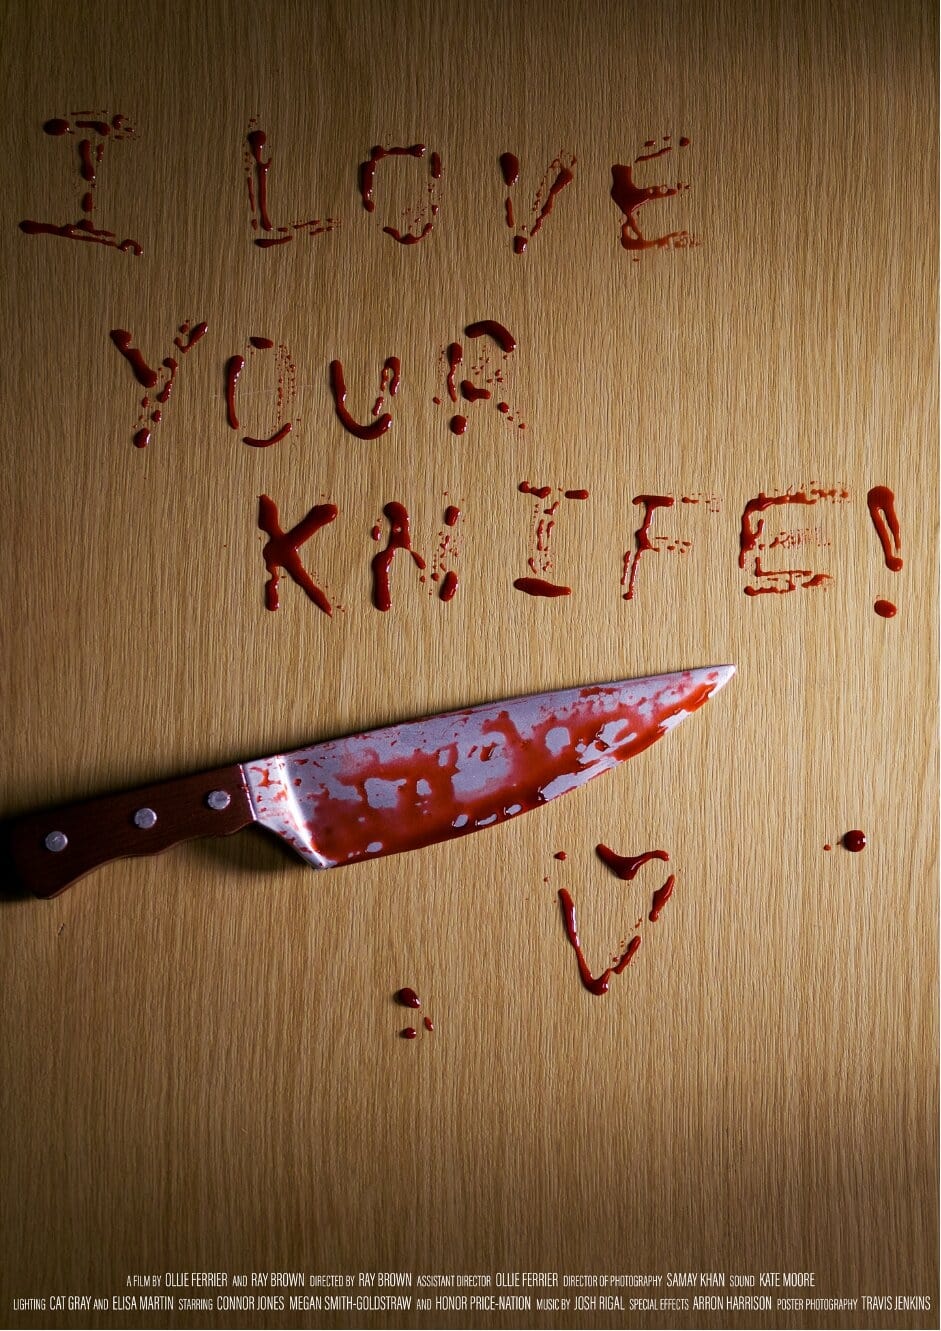 I Love Your Knife!